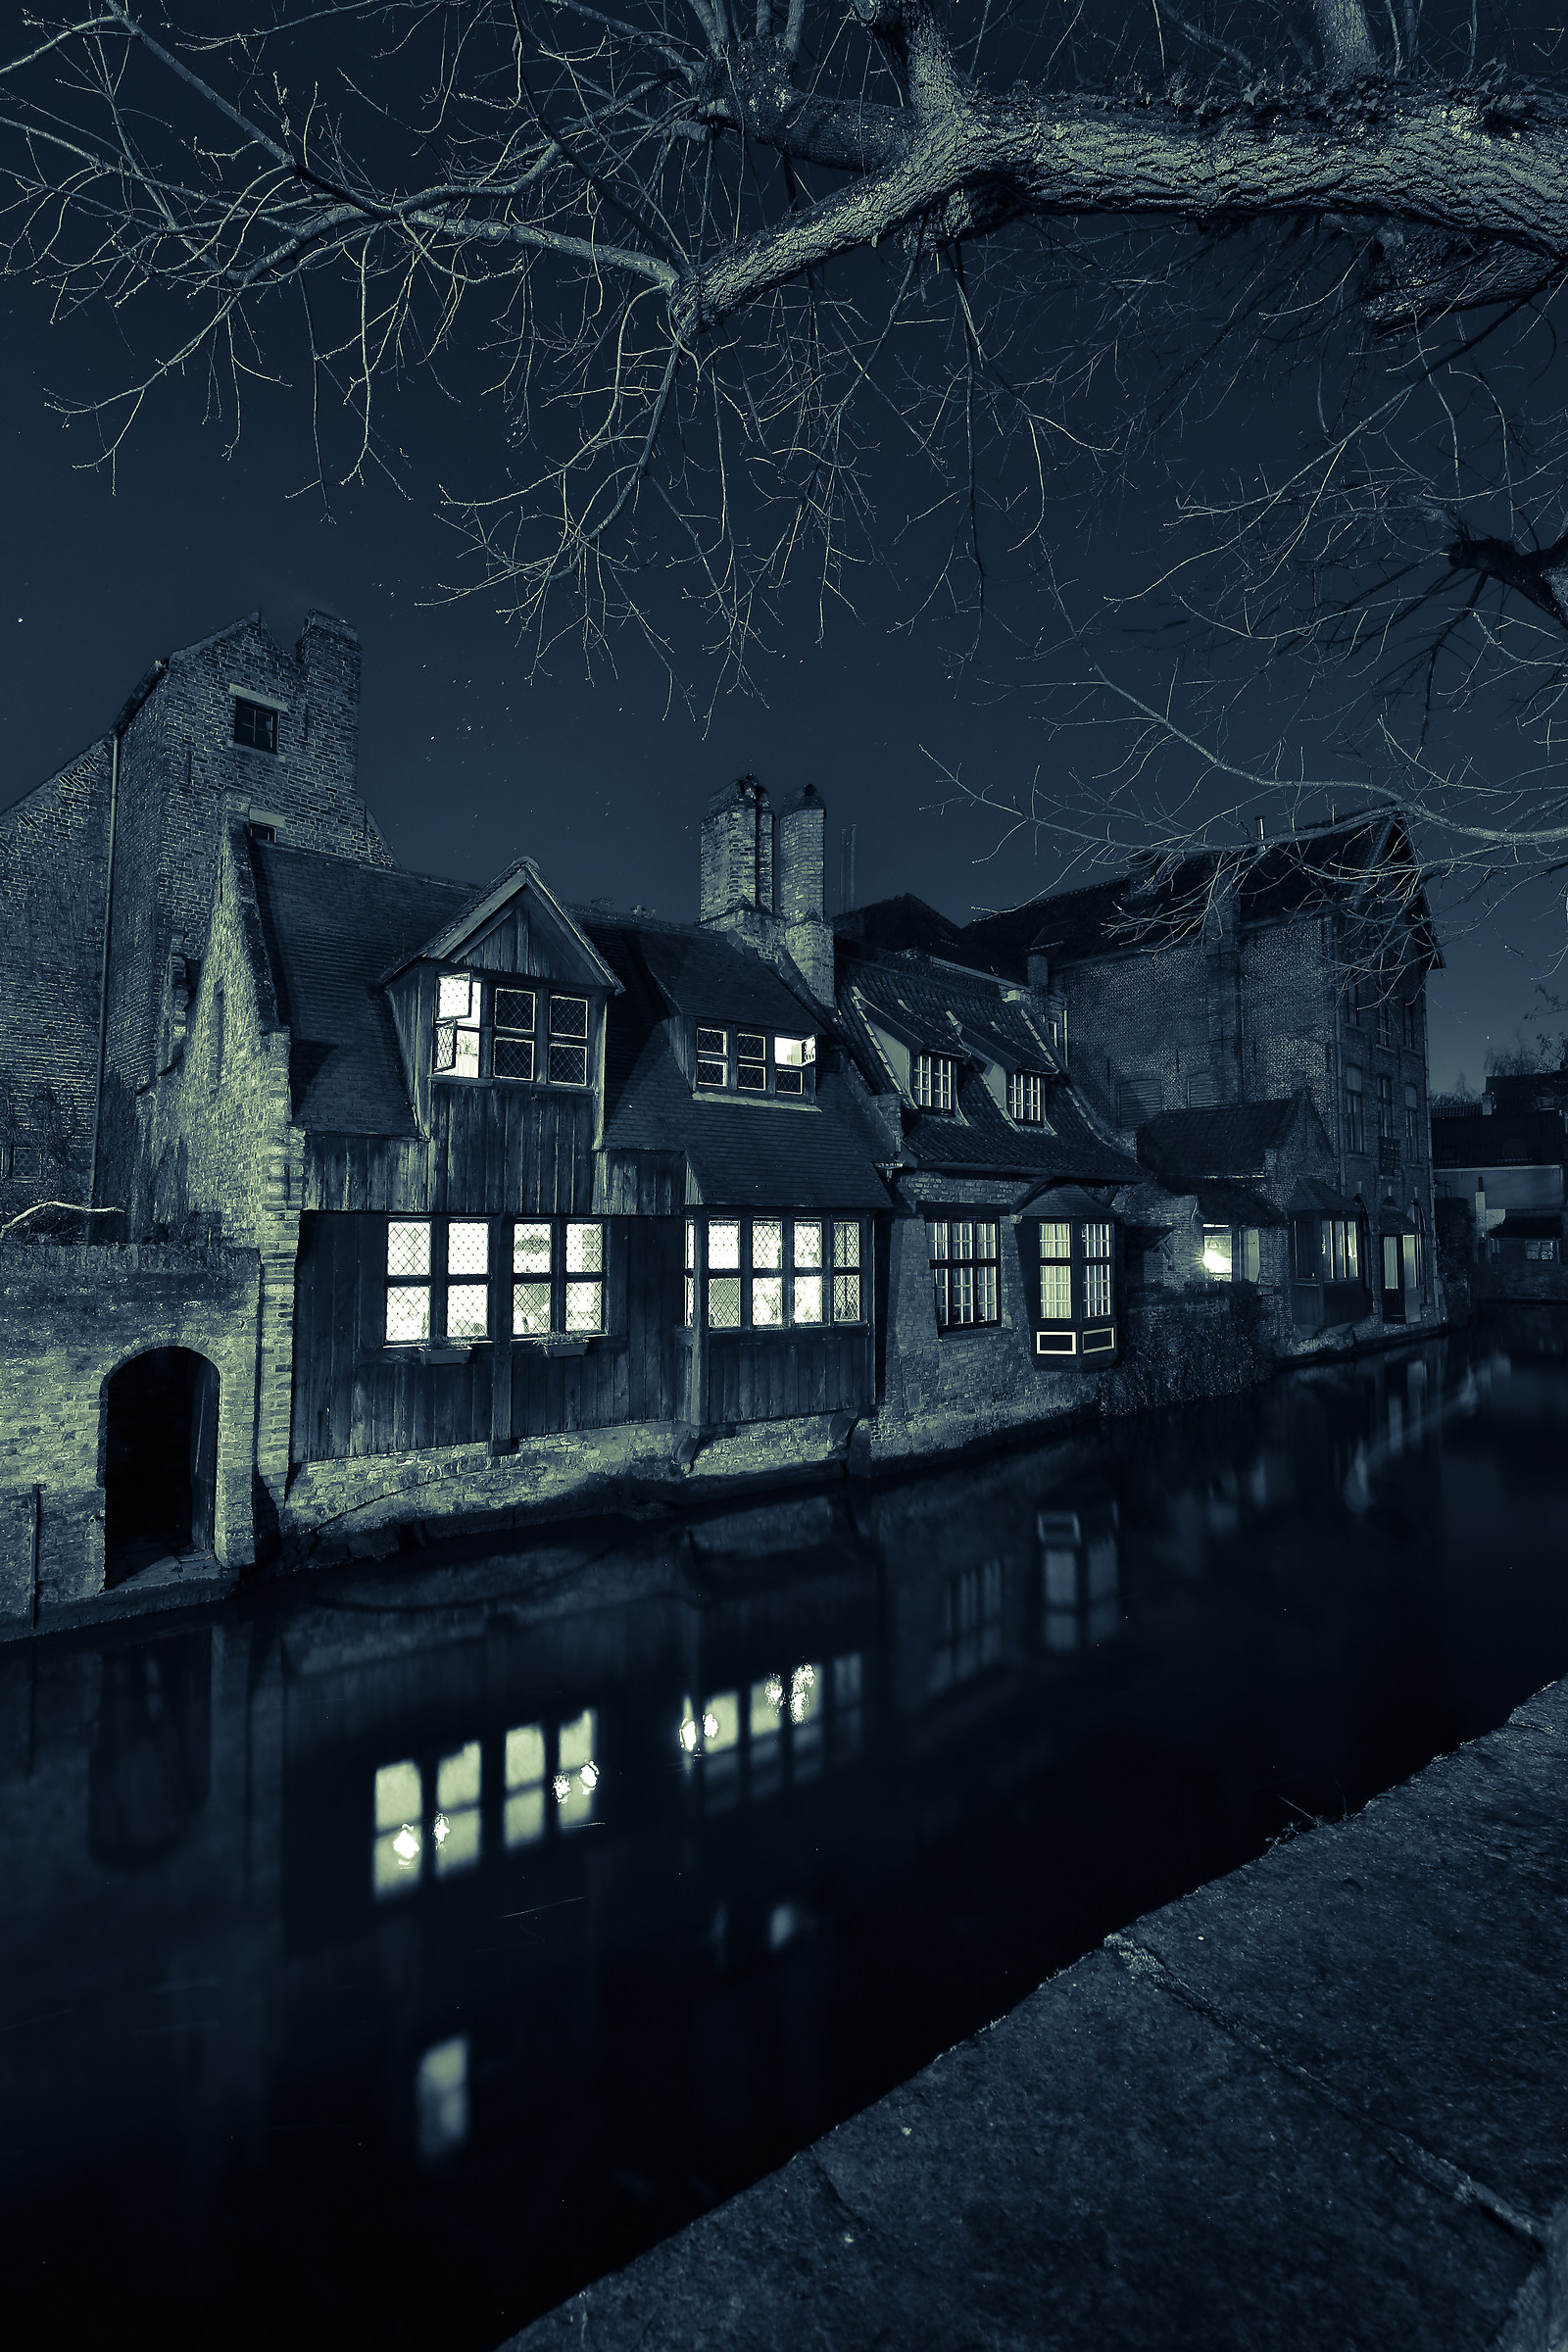 Bruges - Night on the channel...